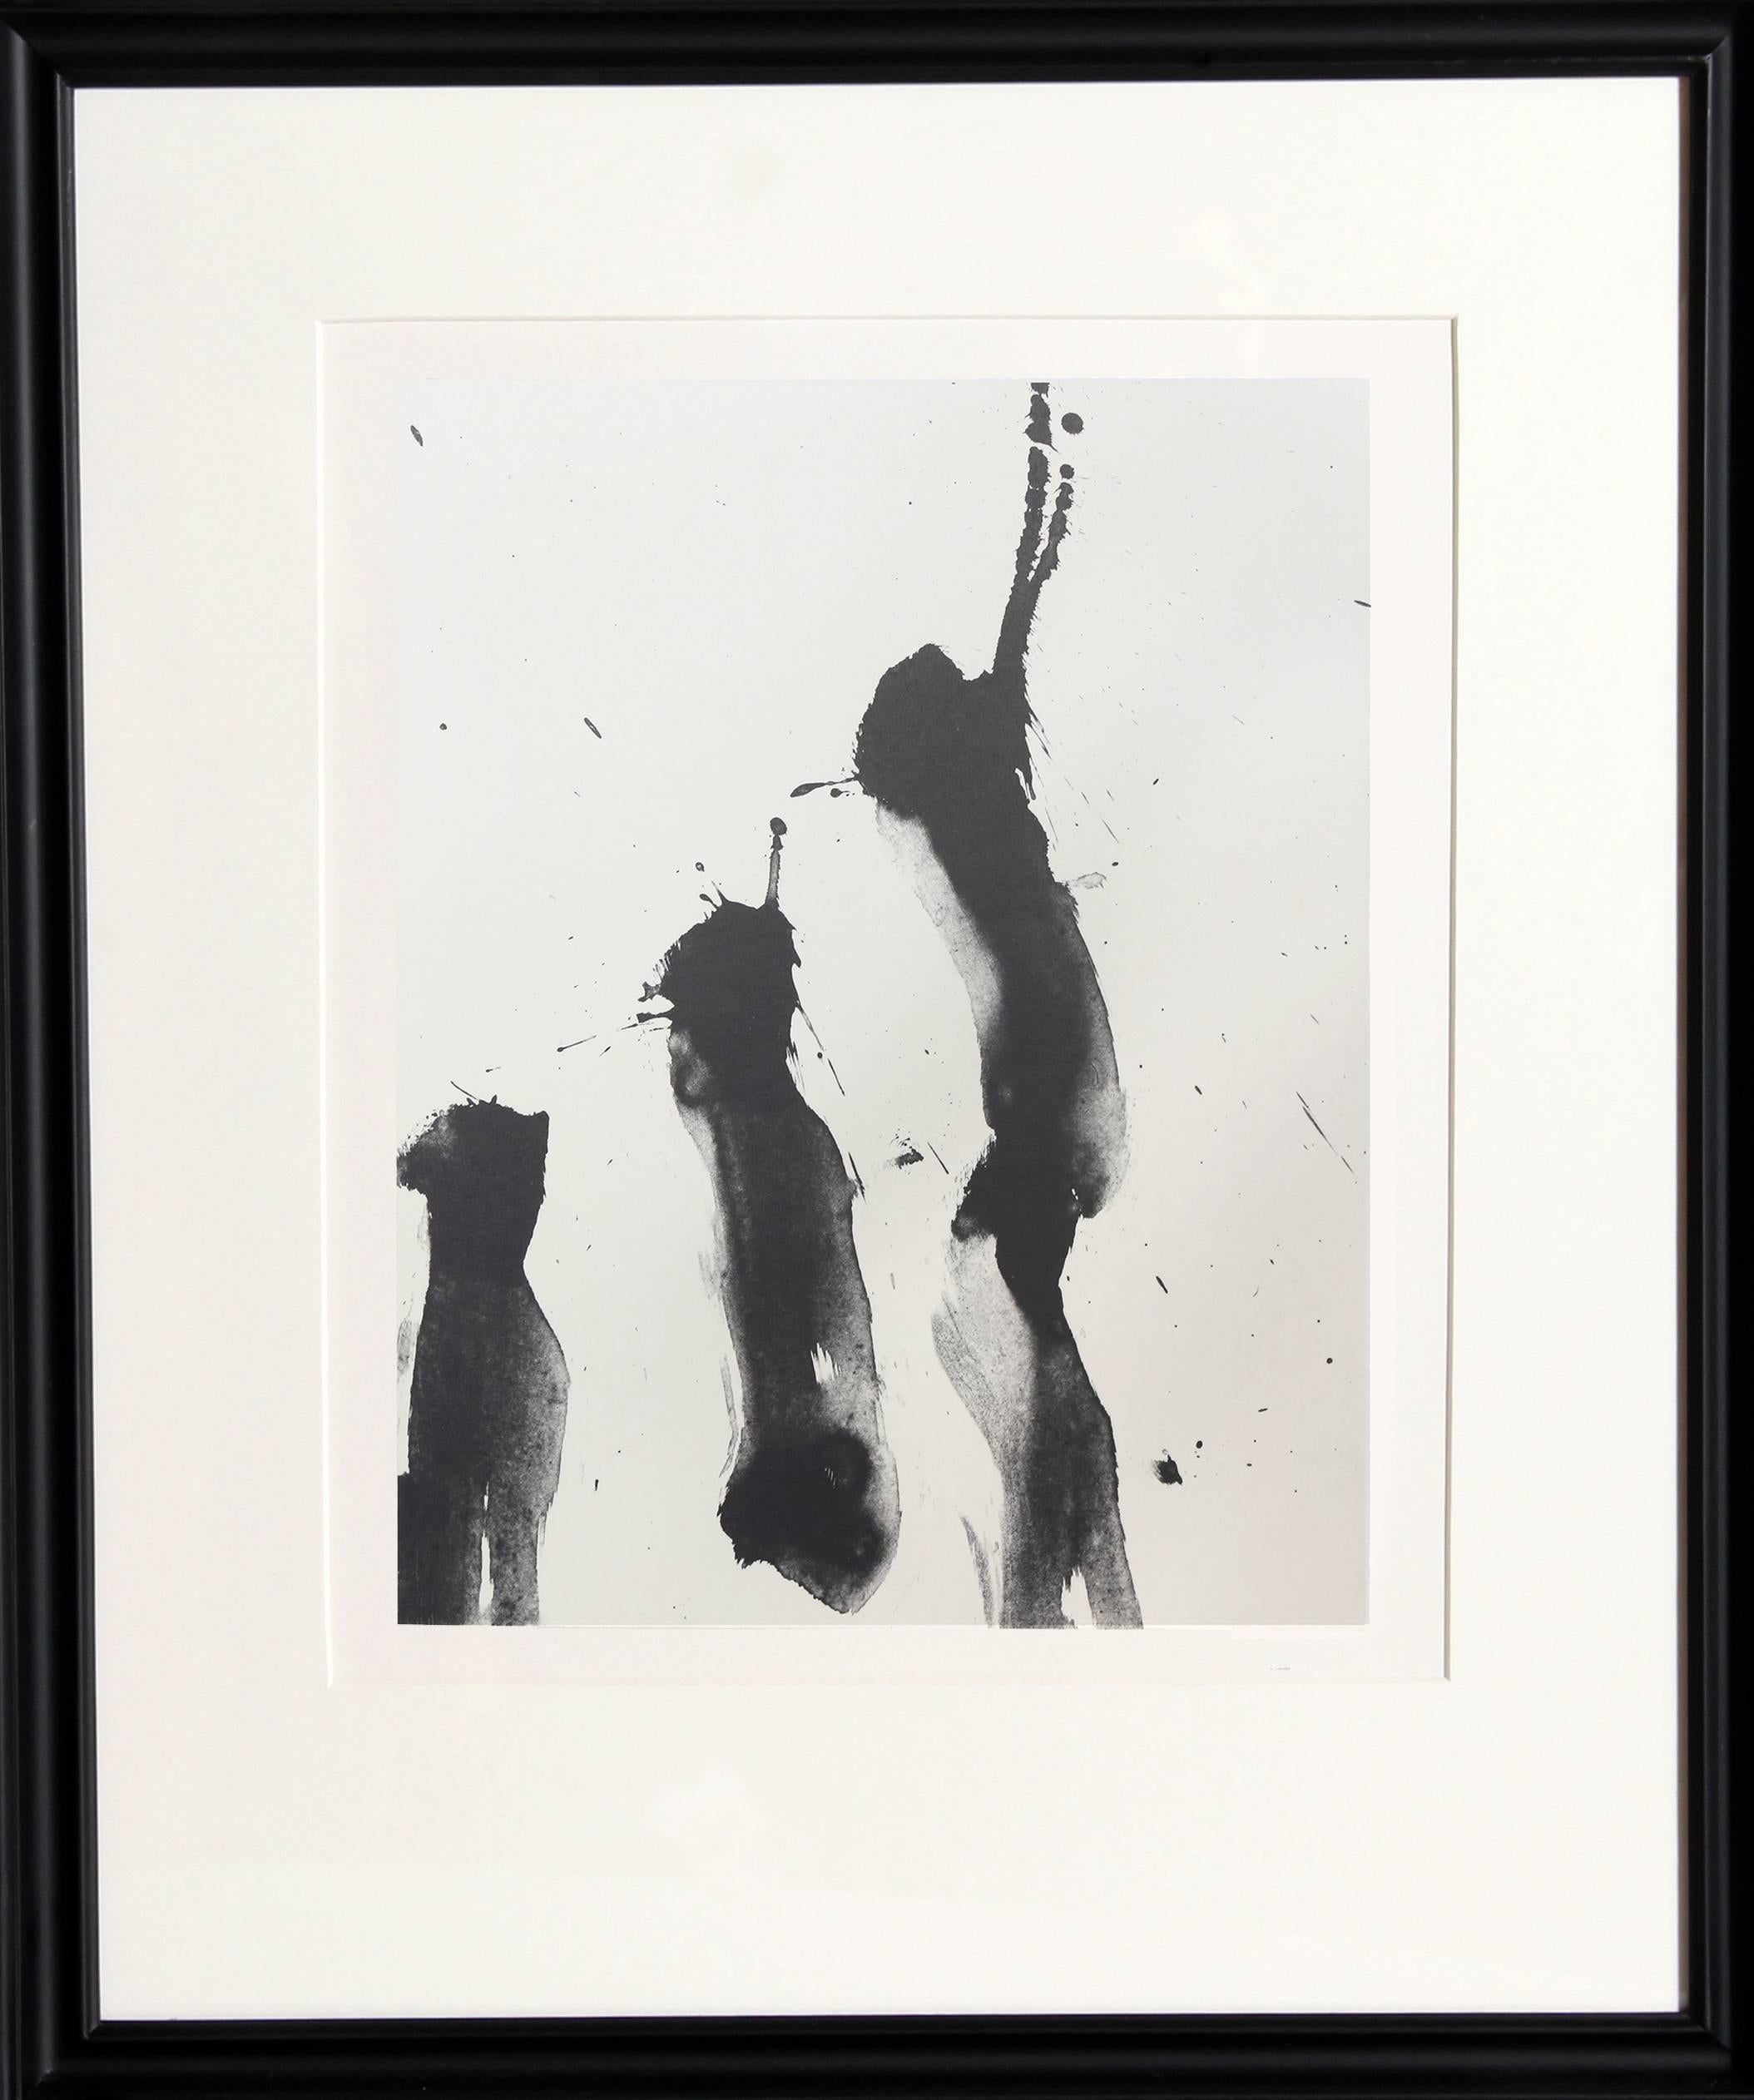 Artist: Robert Motherwell, American (1915 - 1991)
Title: No. 4 from Three Poems, collaboration with Octavio Paz
Year: 1987
Medium:	Lithograph on Japon with Chine Colle
Edition: 750
Image Size: 14 x 10.5 inches
Paper Size: 21 x 16 inches
Frame Size: